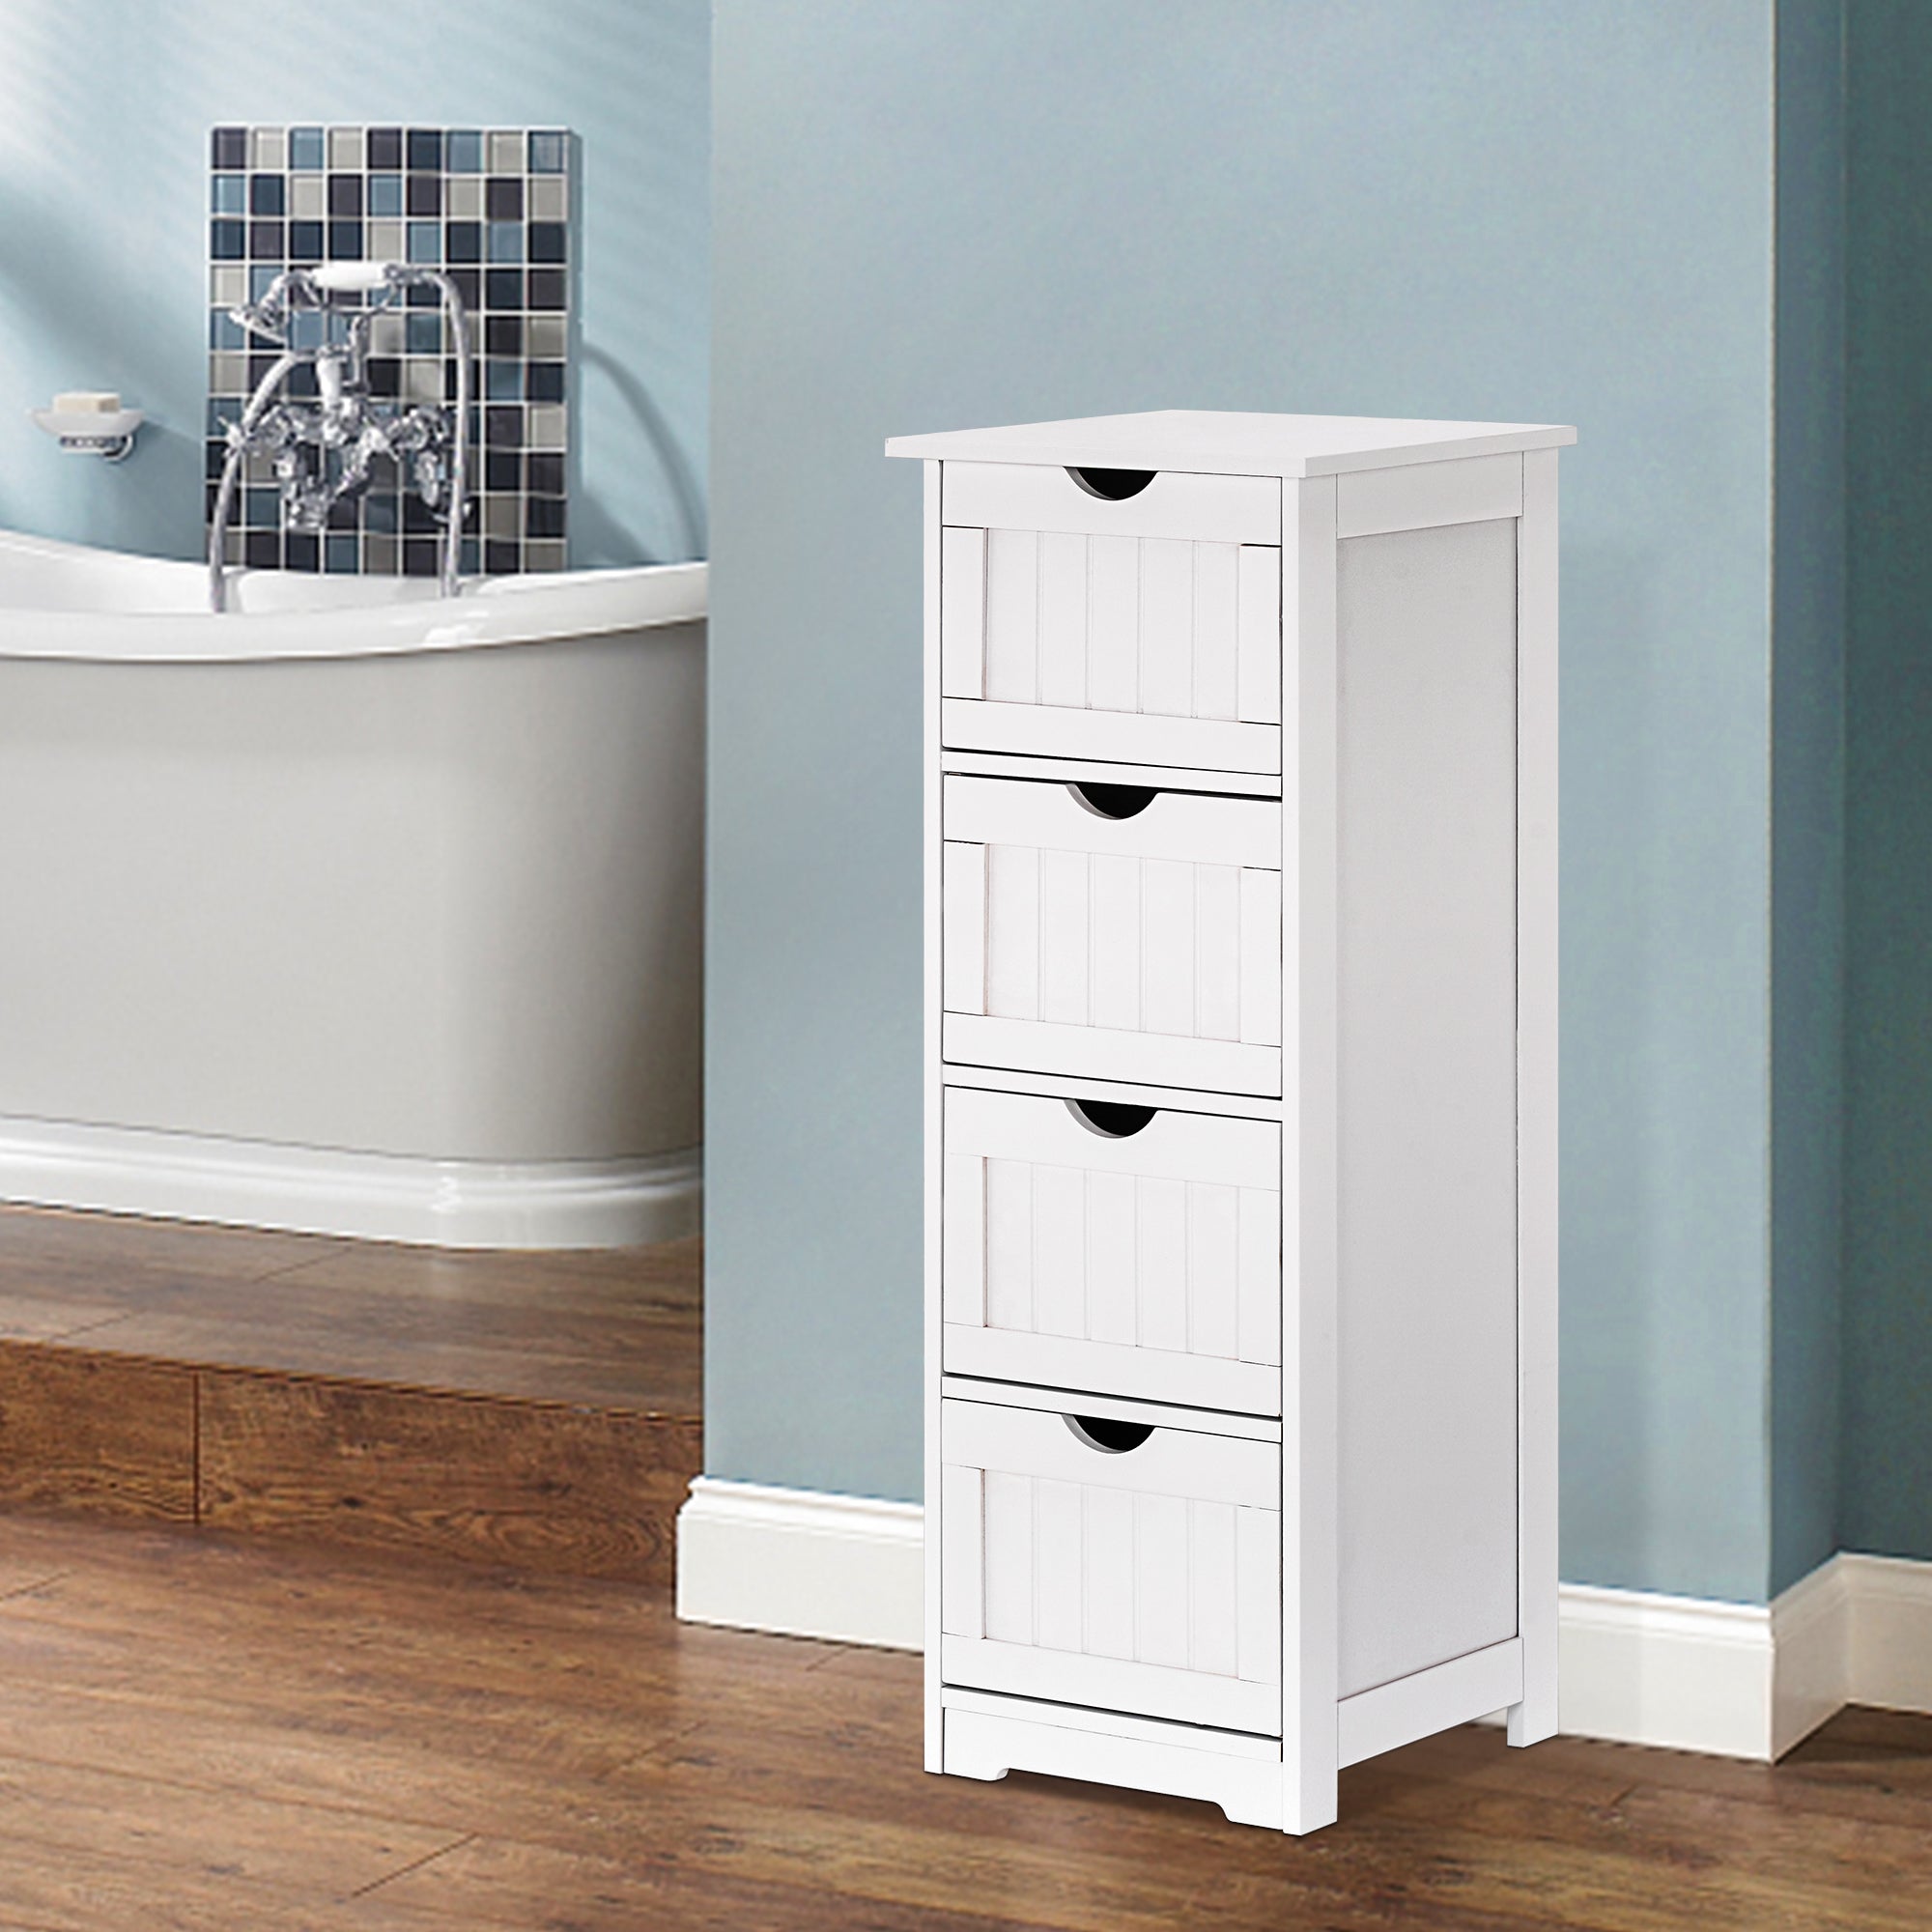 Bathroom Storage Cabinets Free Standing with 4 Drawers White Bathroom for Laundry Room, Bedroom 6700-BT03W